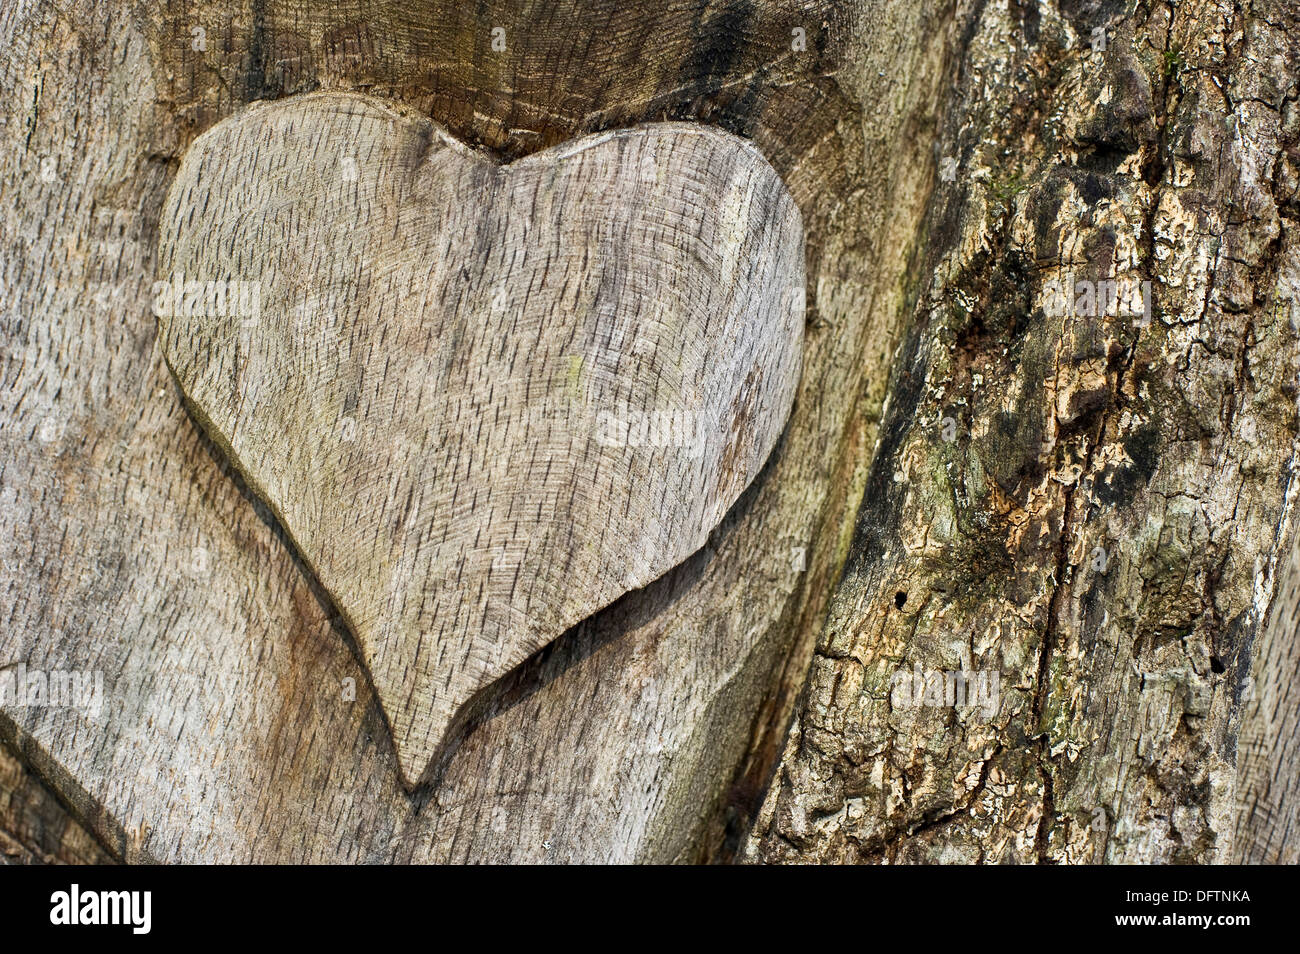 Wooden heart carved Into a tree trunk, Germany Stock Photo